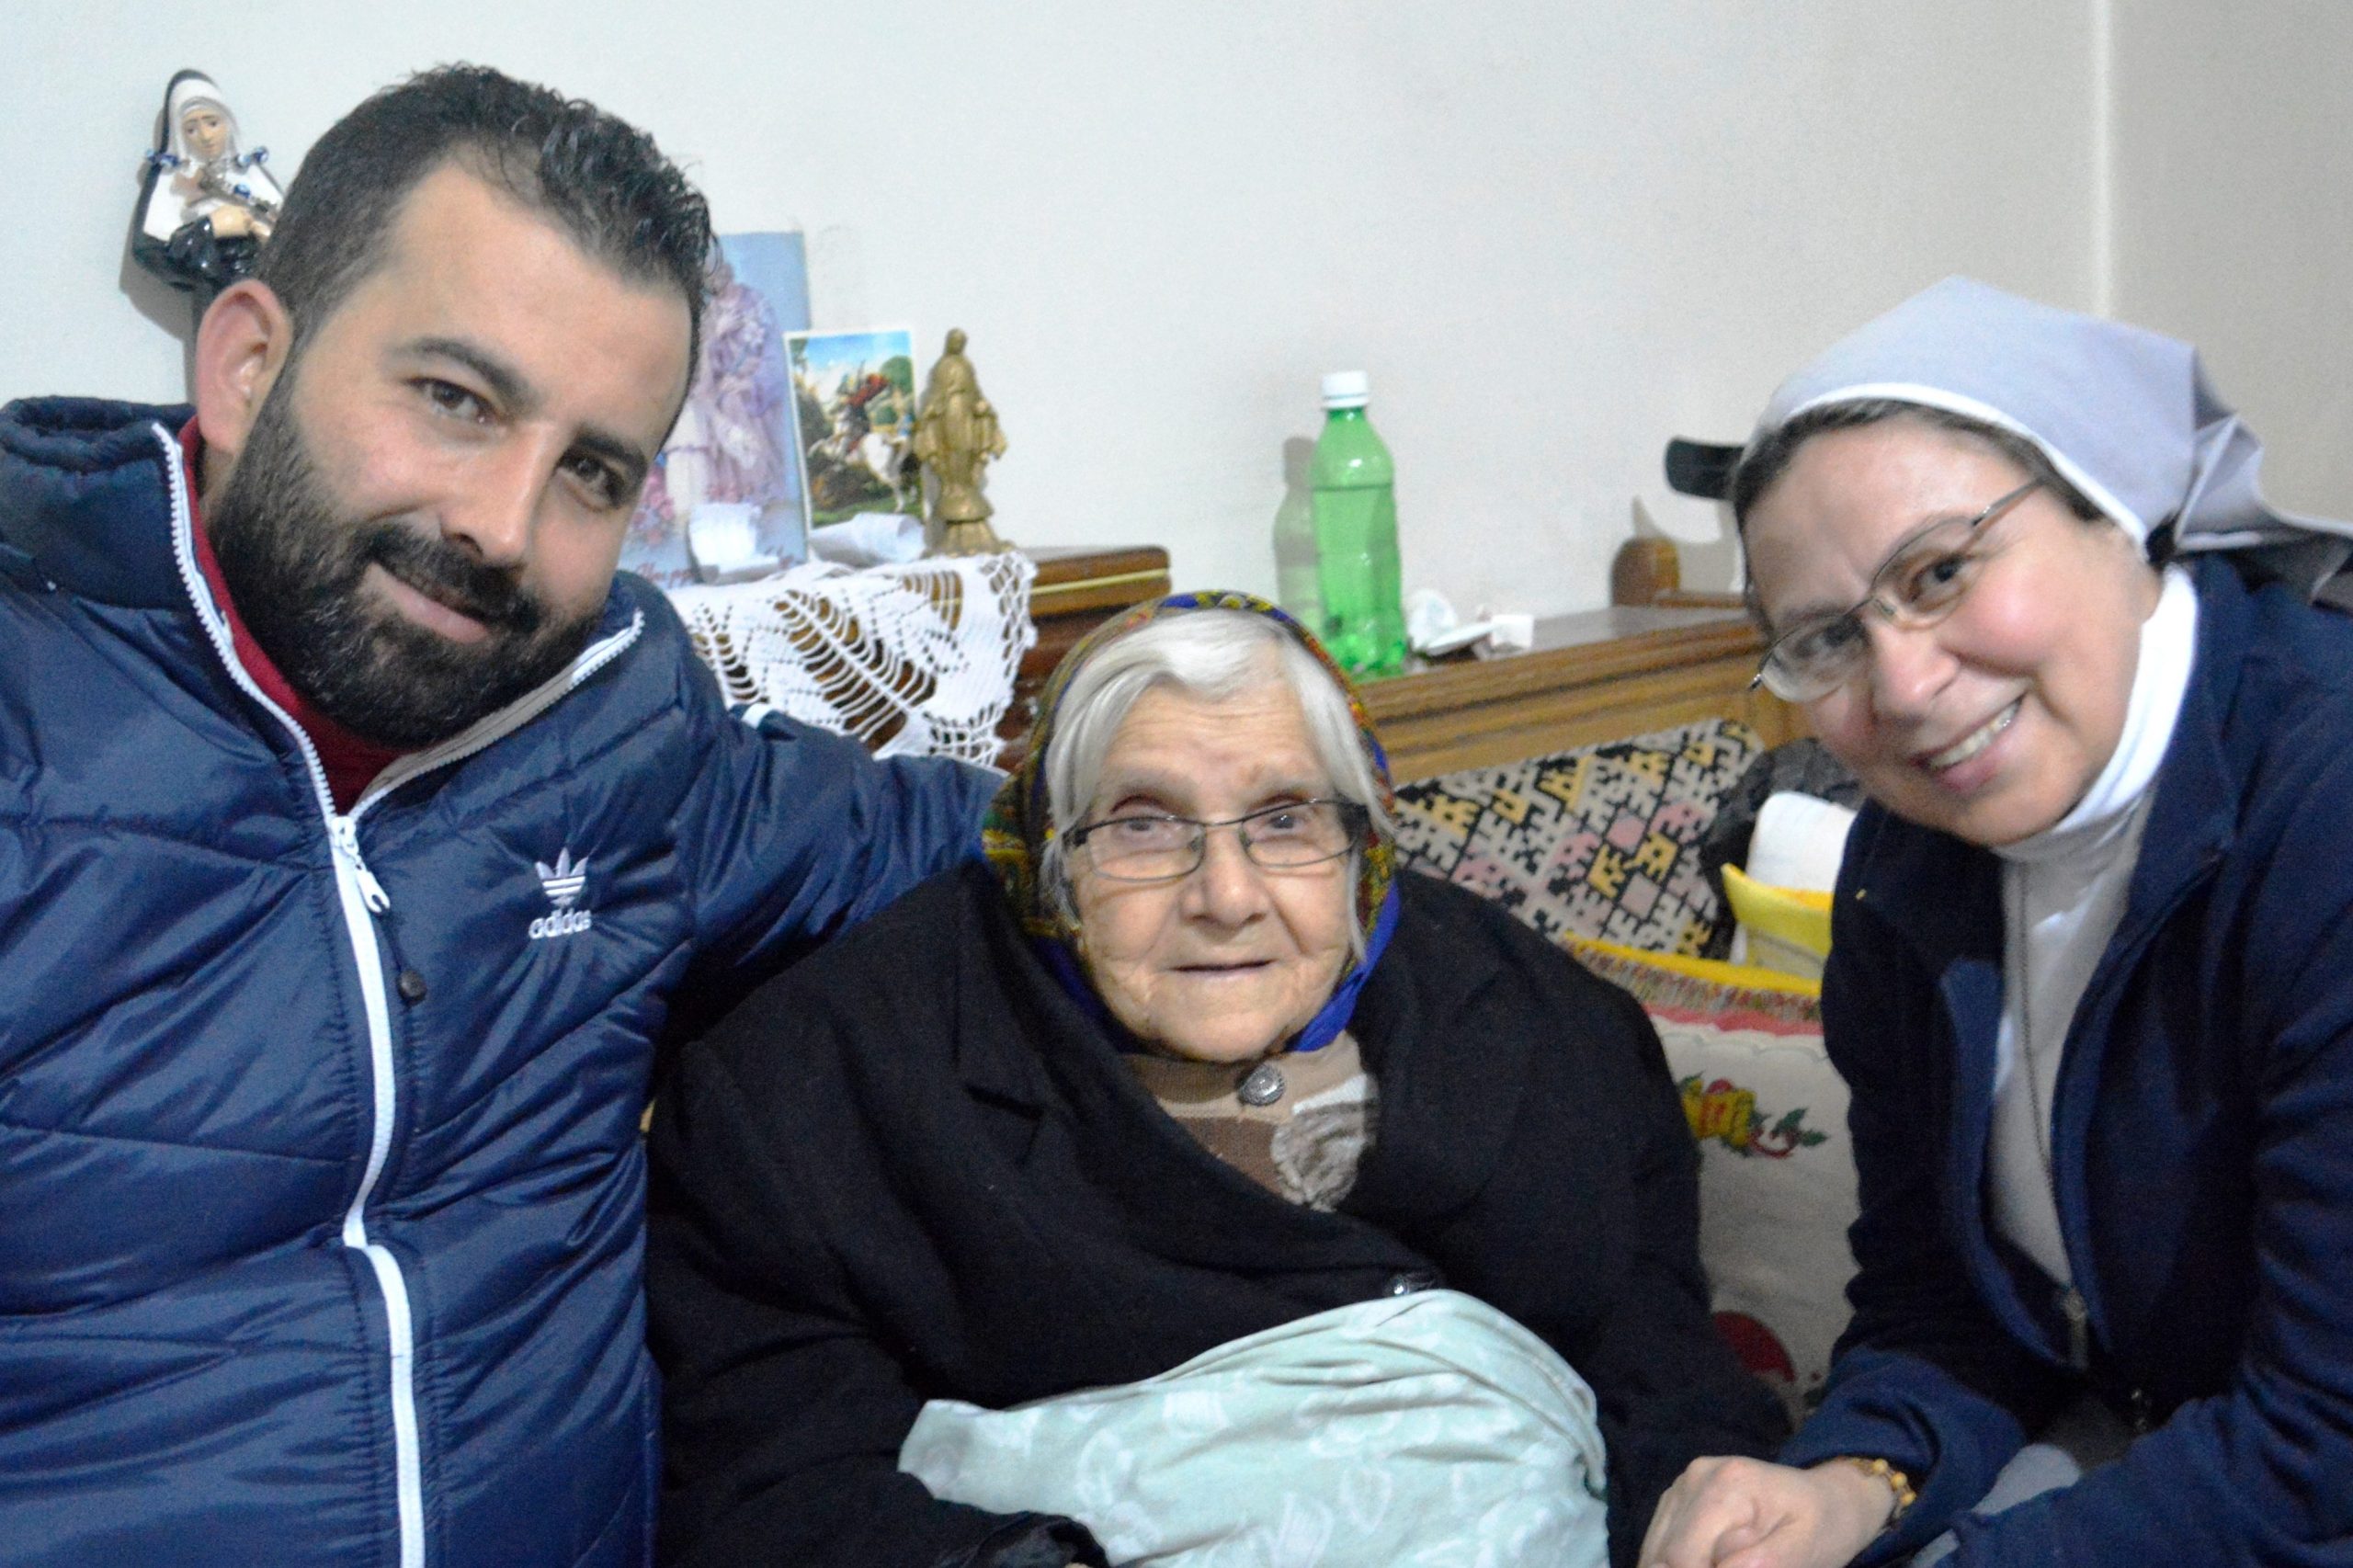 ACN project partner Sister Annie Demerjian with Lucine, aged 85, from Aleppo, Syria, and volunteer Fadi.